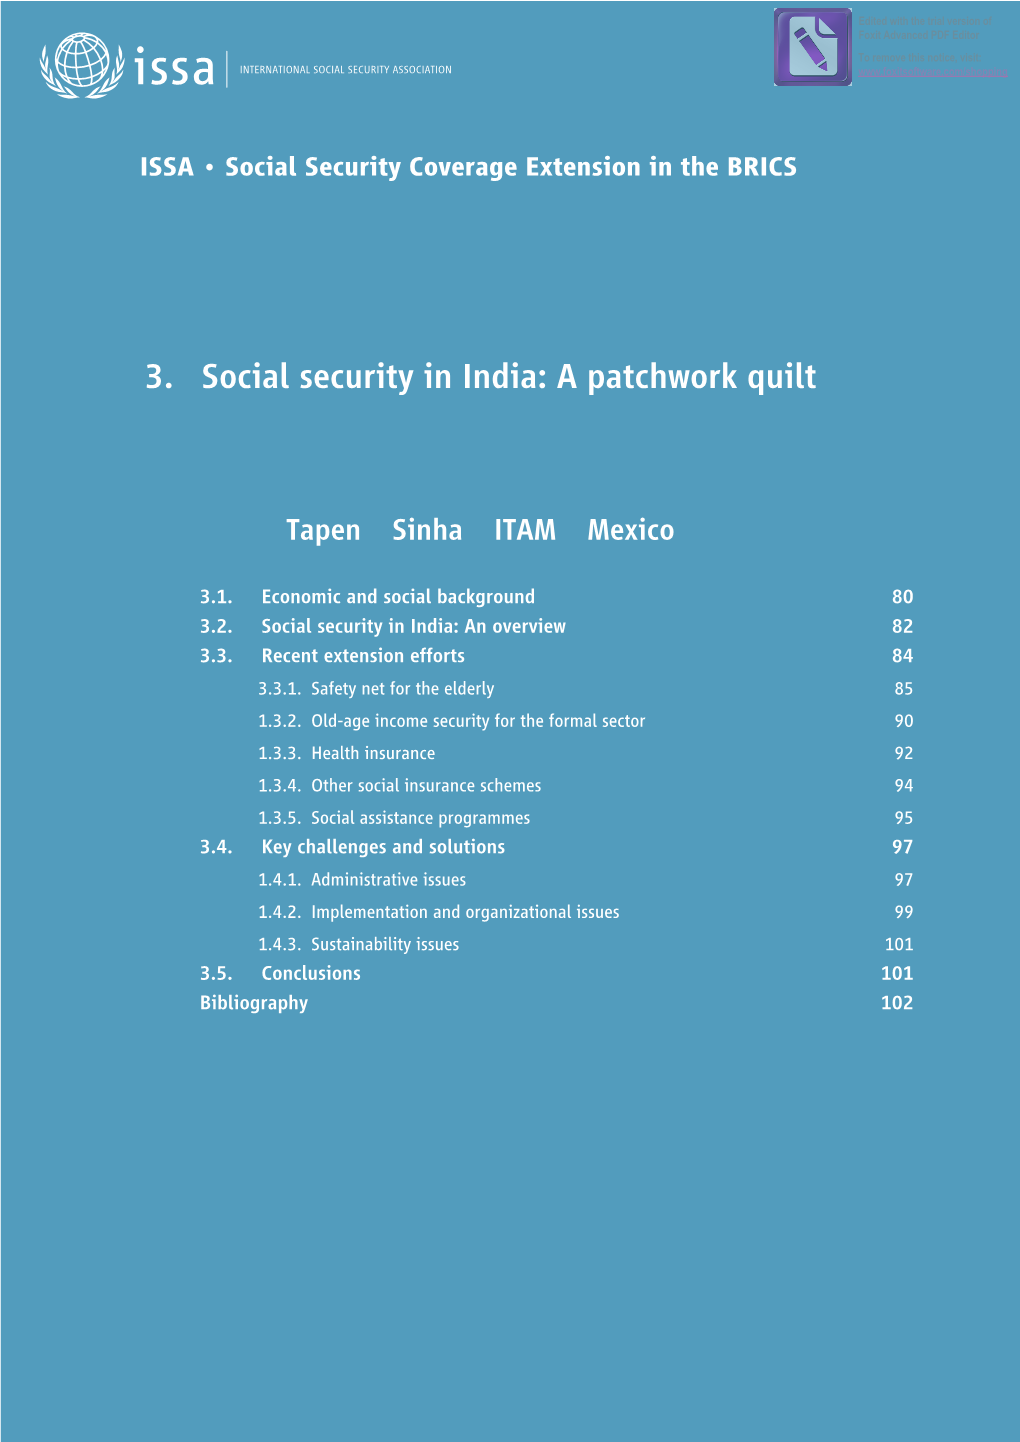 3. Social Security in India: a Patchwork Quilt